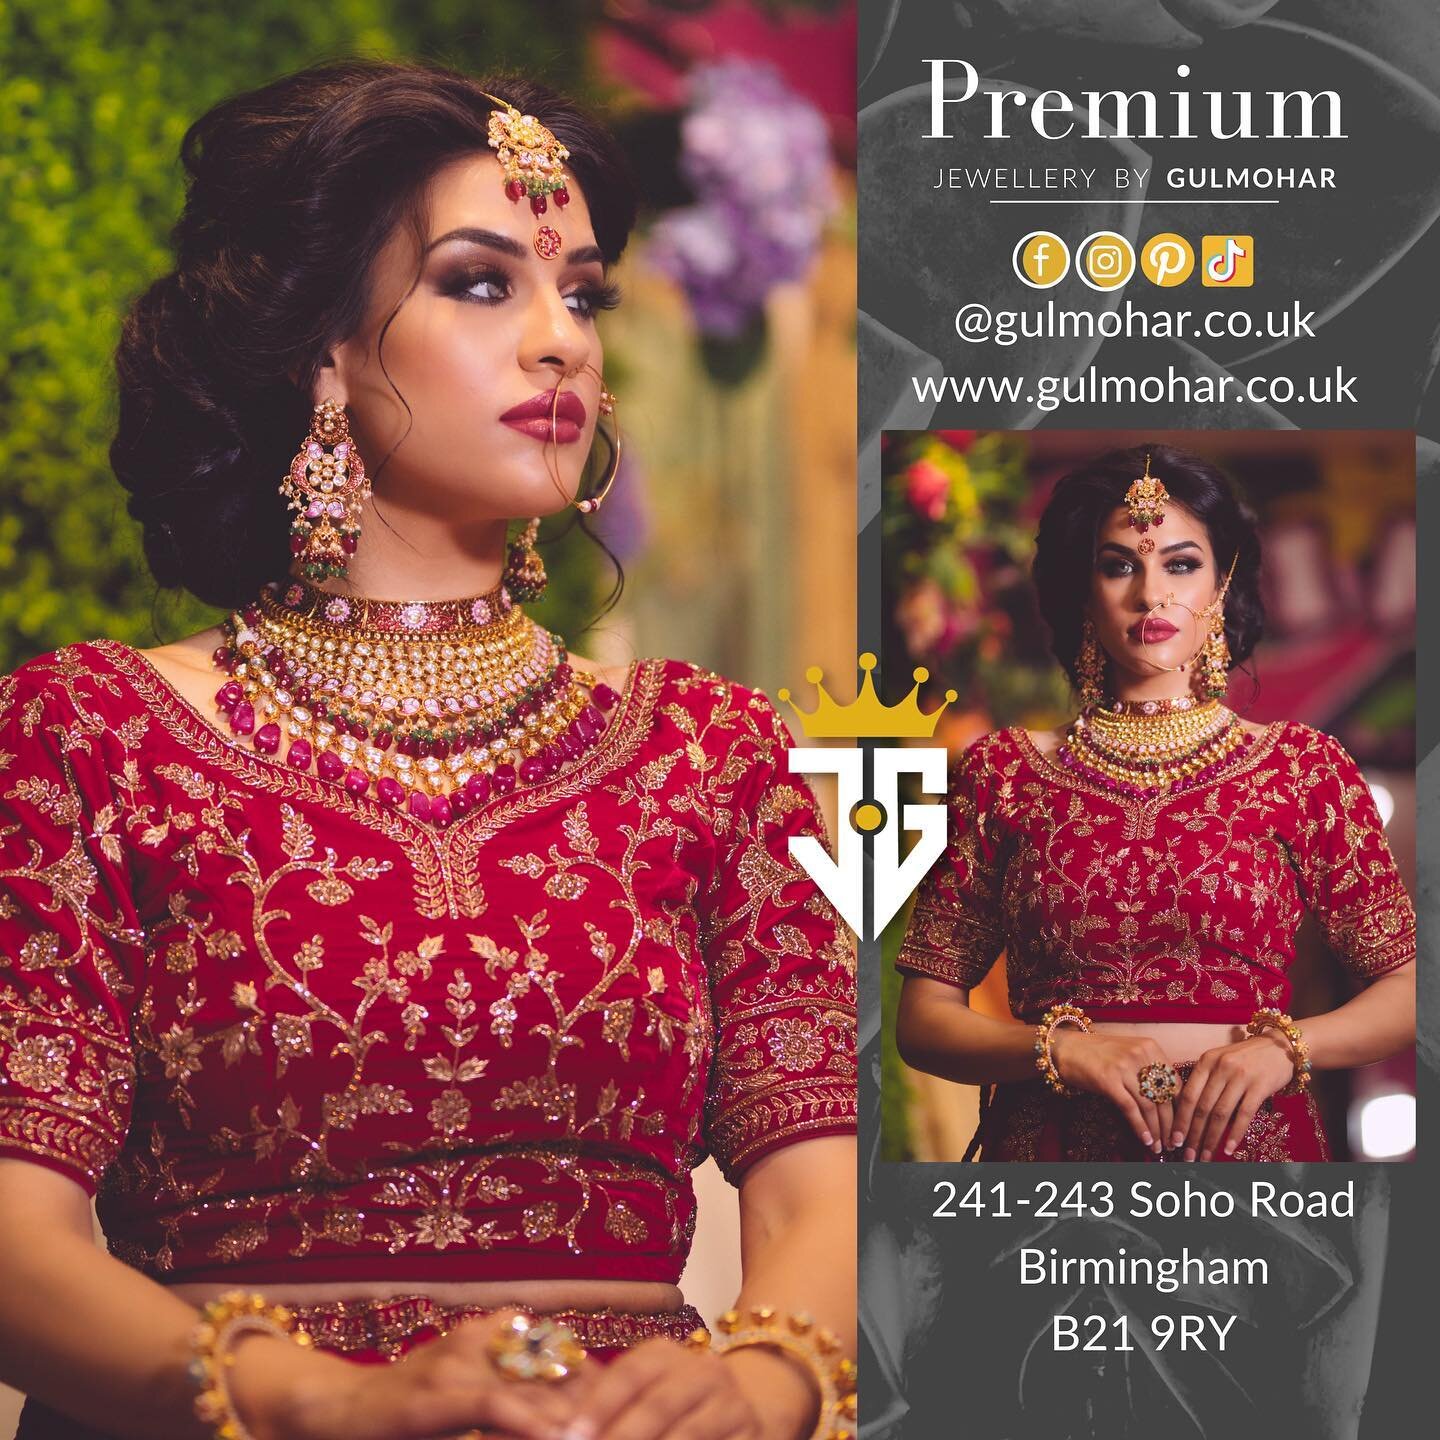 We specialise in premium jewellery with a premium customer service and product at affordable pricing to suit everyone.
.
.
&ldquo;Talent wins games, but teamwork and intelligence win championships.&rdquo;
.
TEAM CREW
Makeup @ruheena_k_artistry 
Hairs